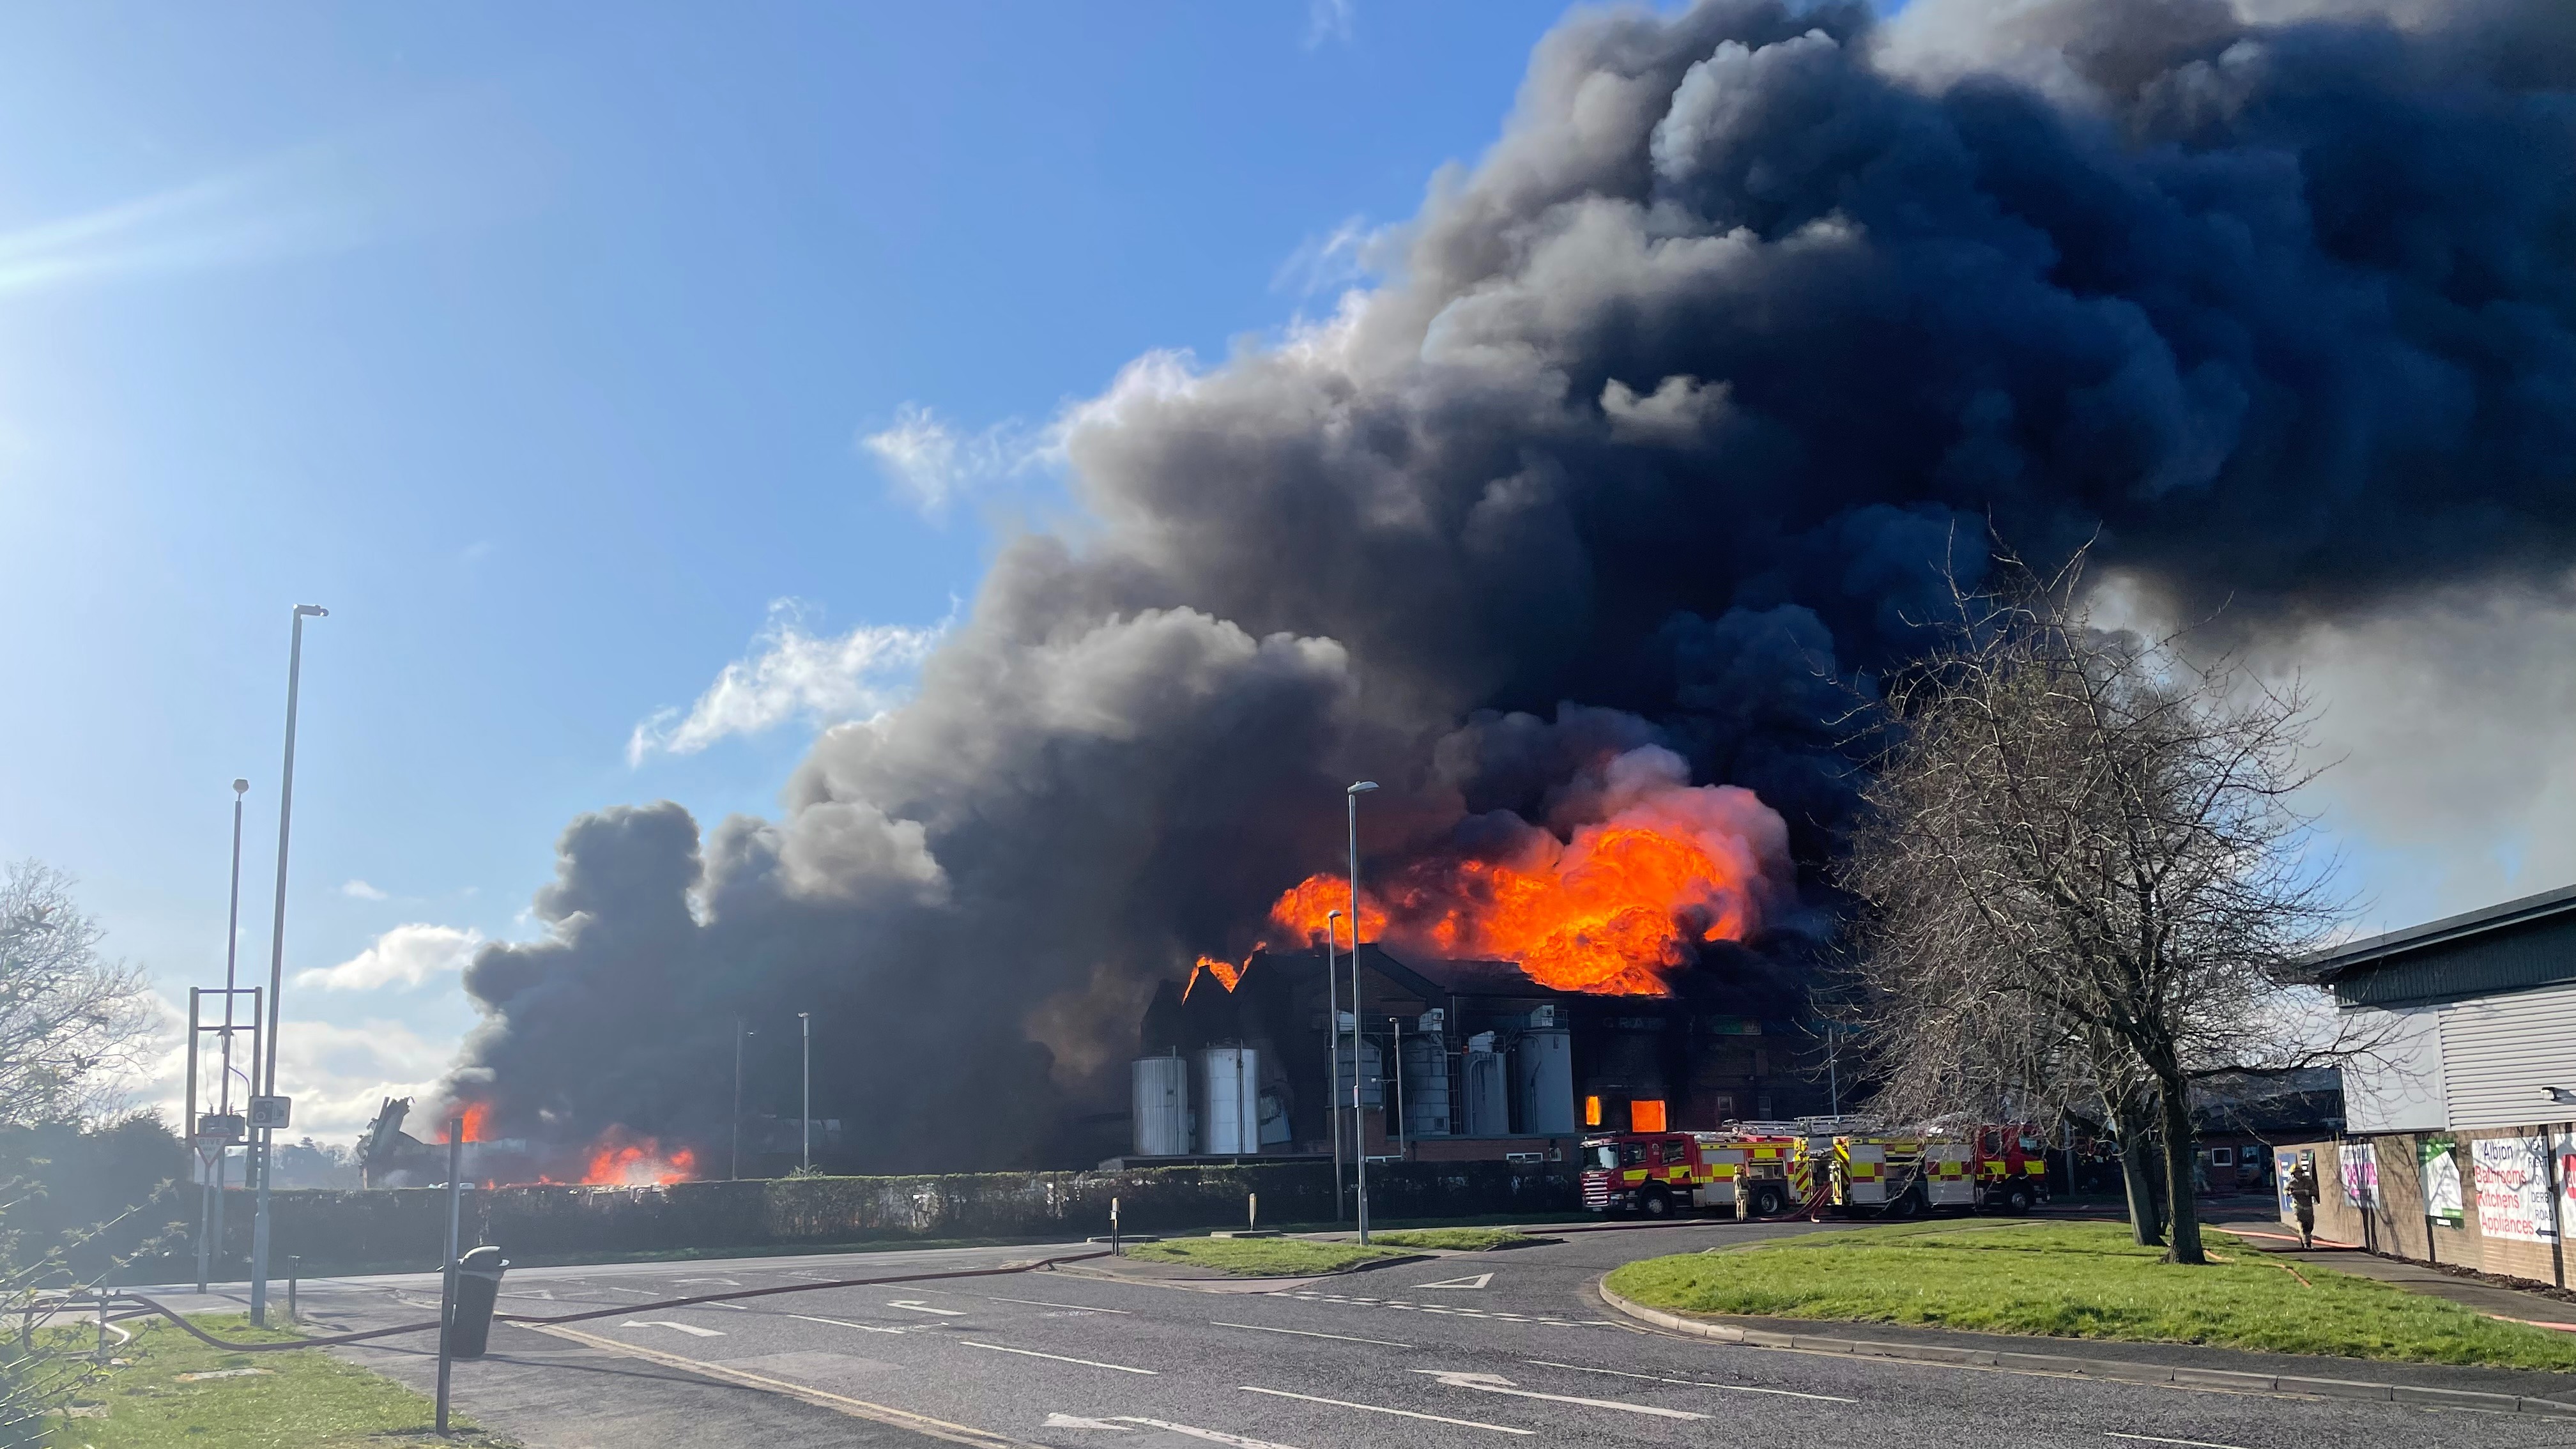 Burton factory fire that caused smoke seen for seven miles accidental, say investigators ITV News Central